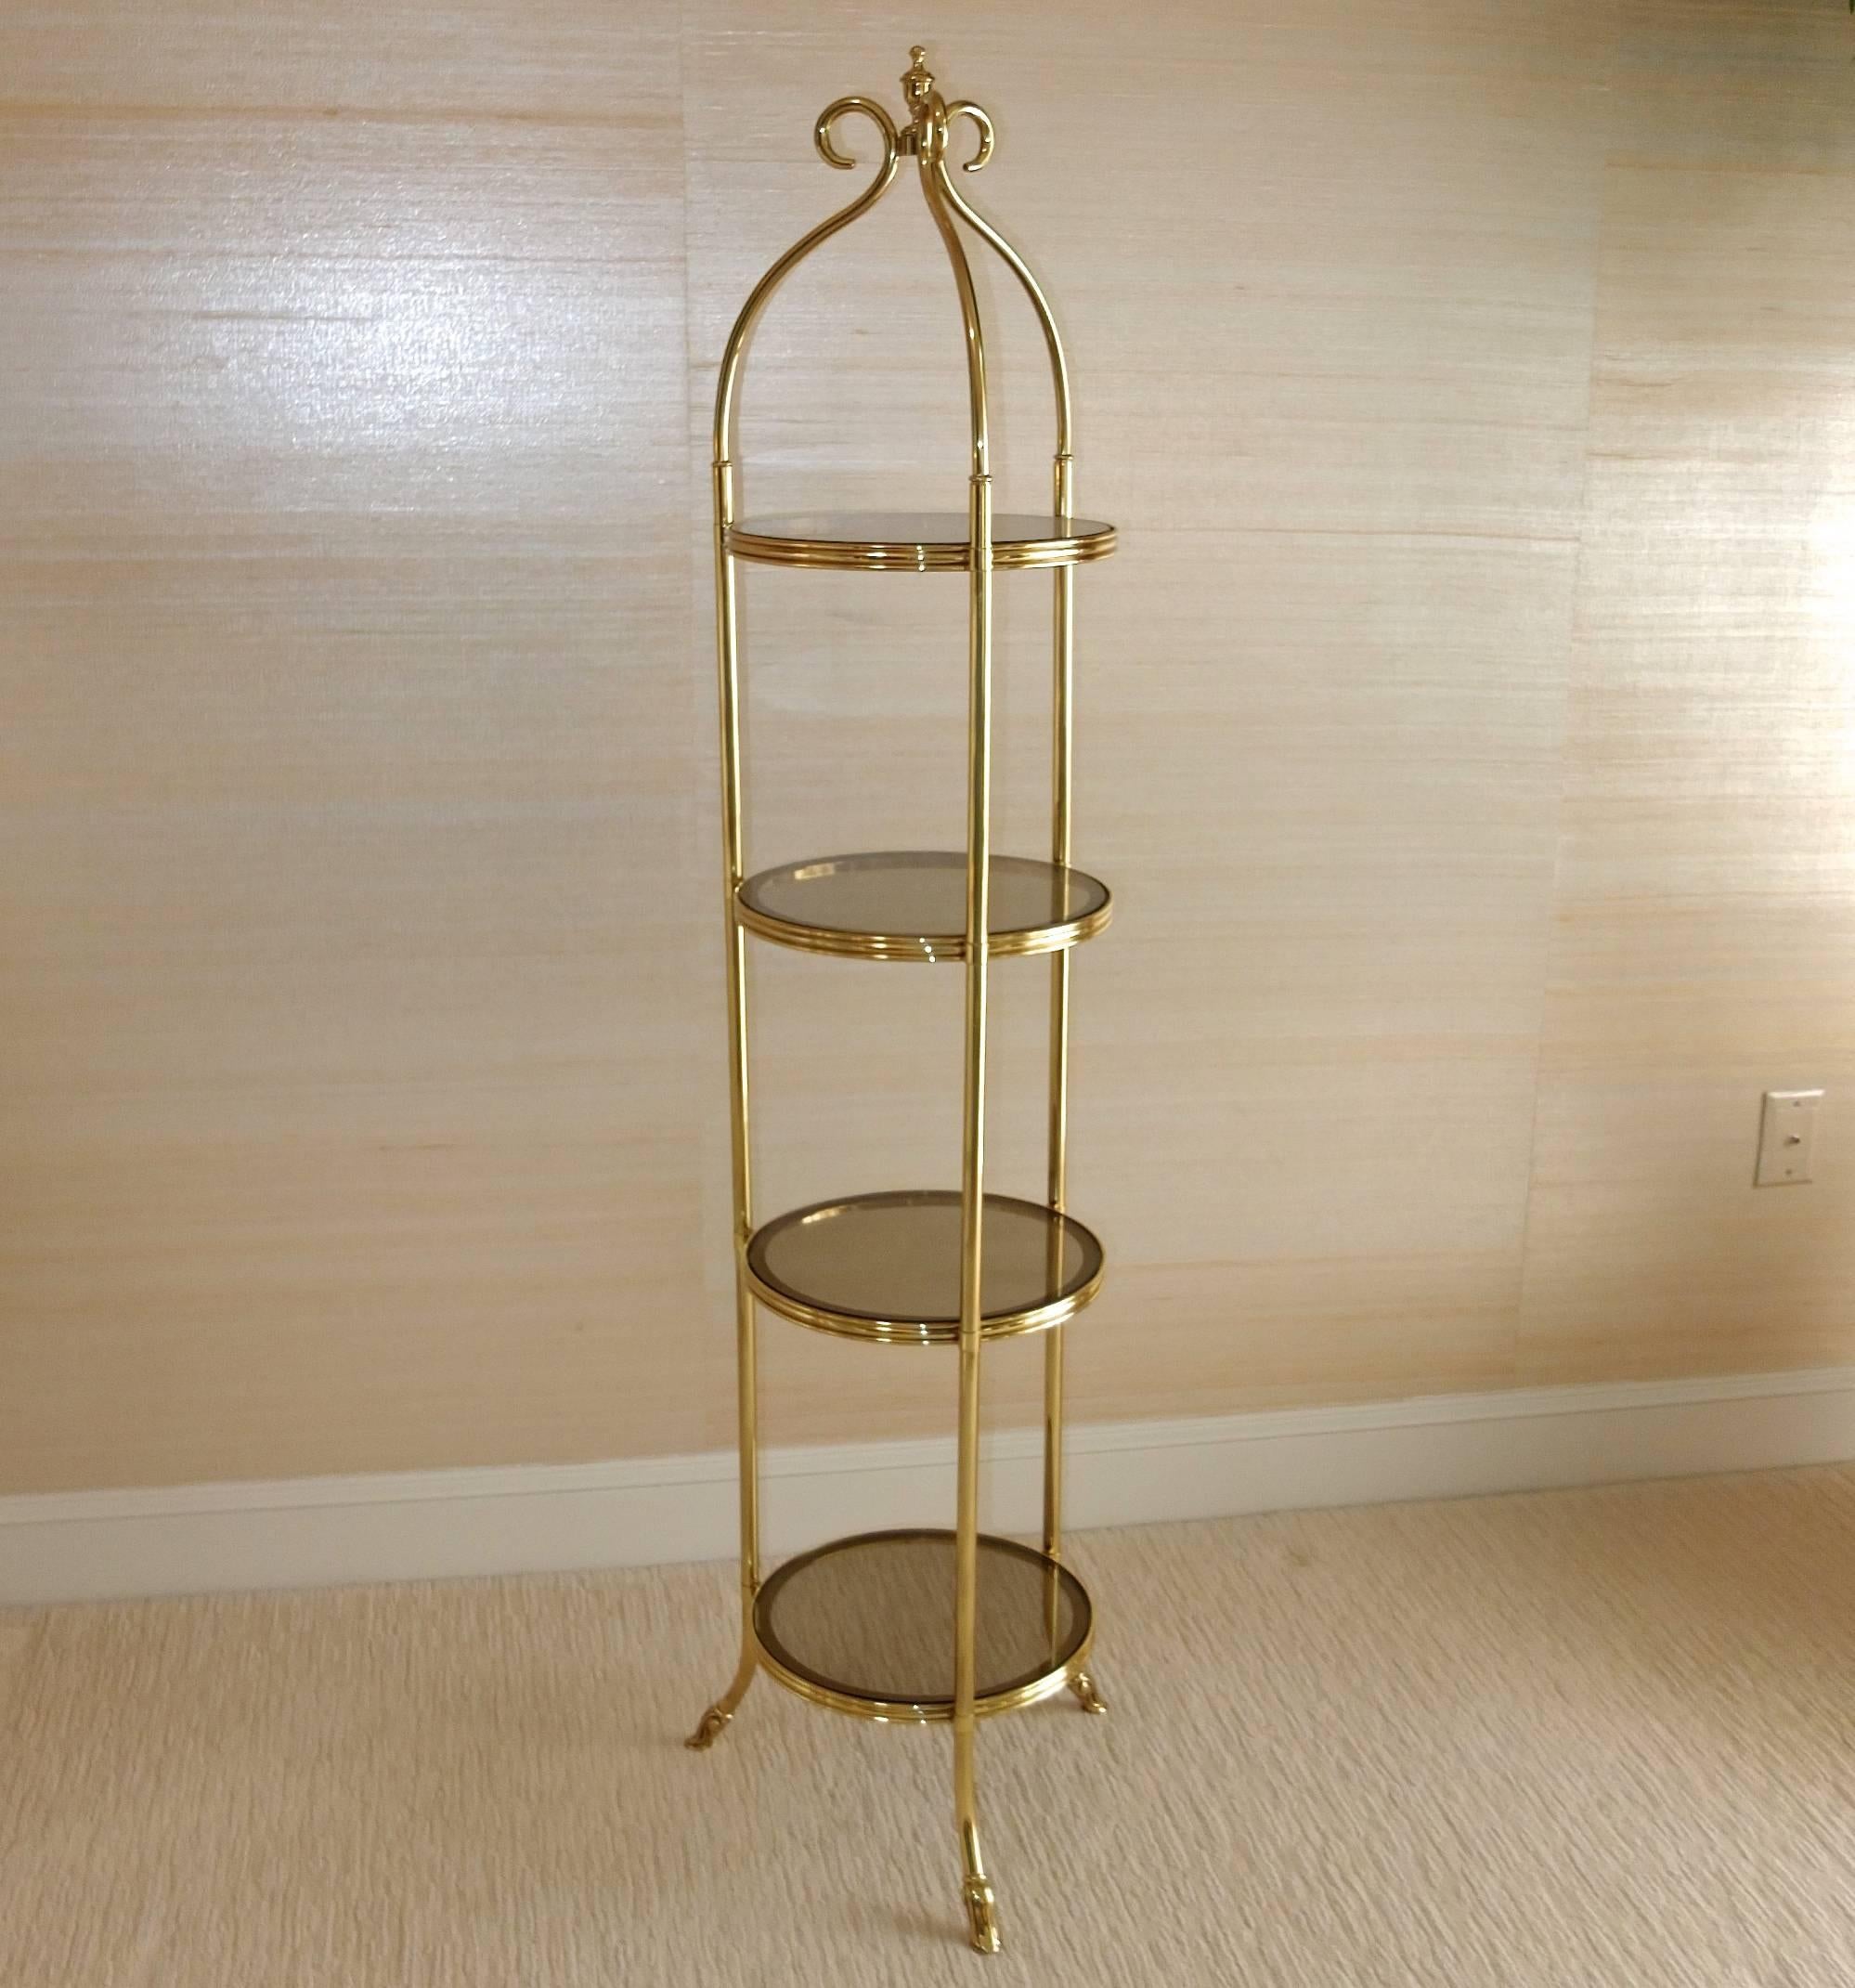 High quality brass three-legged etagere tower with four 12 inch round brass and smoked glass shelves. 5 feet tall. Produced by La Barge, circa late 1970s.

Versatile and functional. Perfect for a powder room.

Brass is brightly polished with no